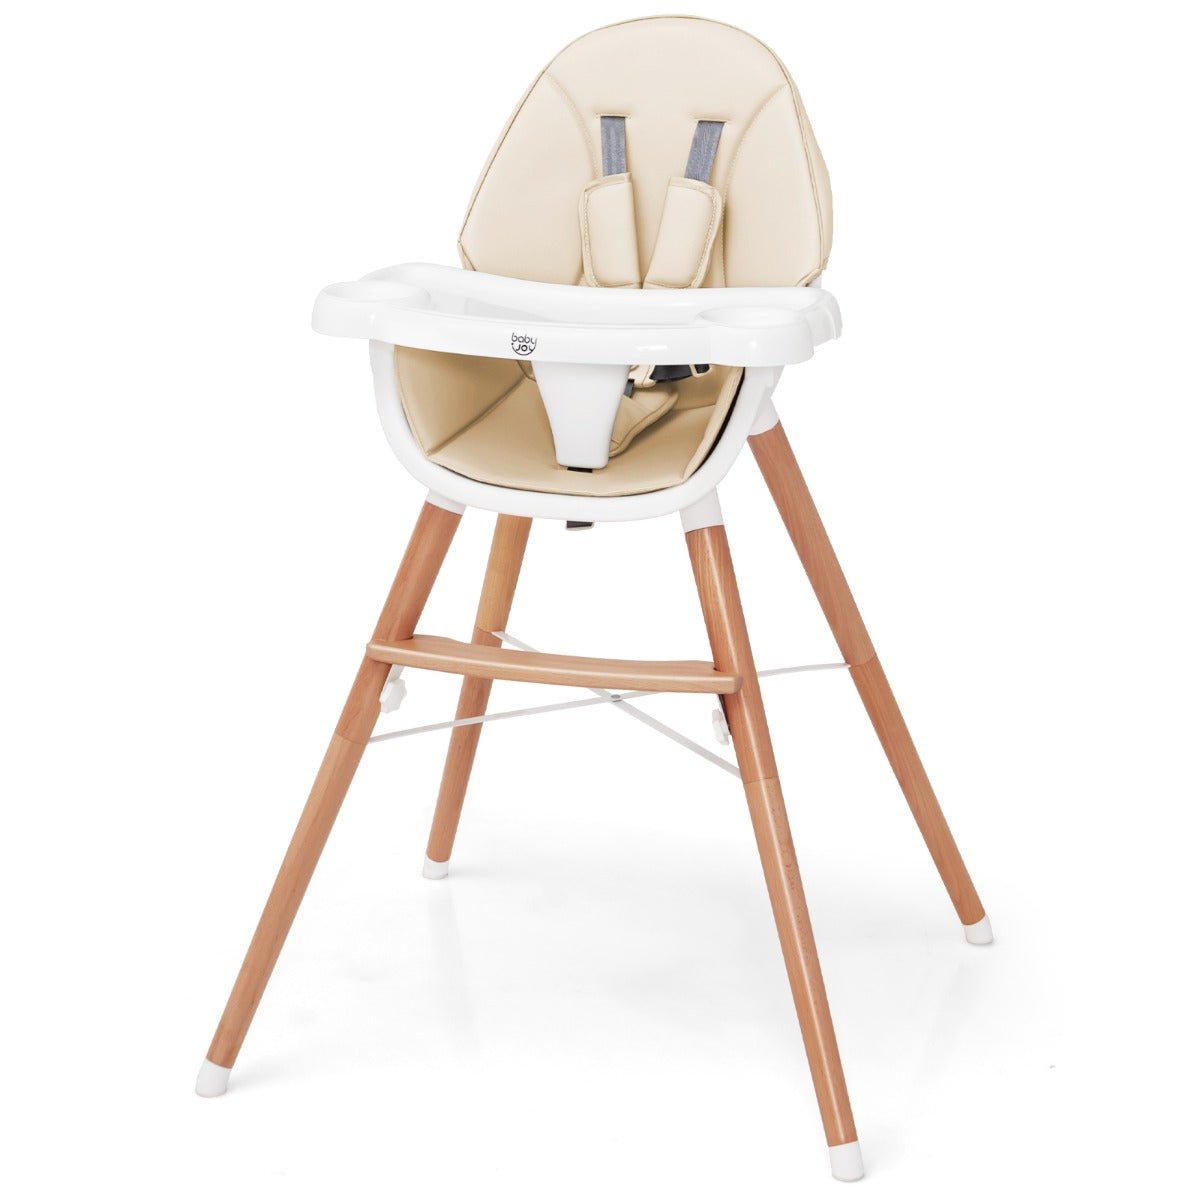 Shop Now For Wooden High Chair